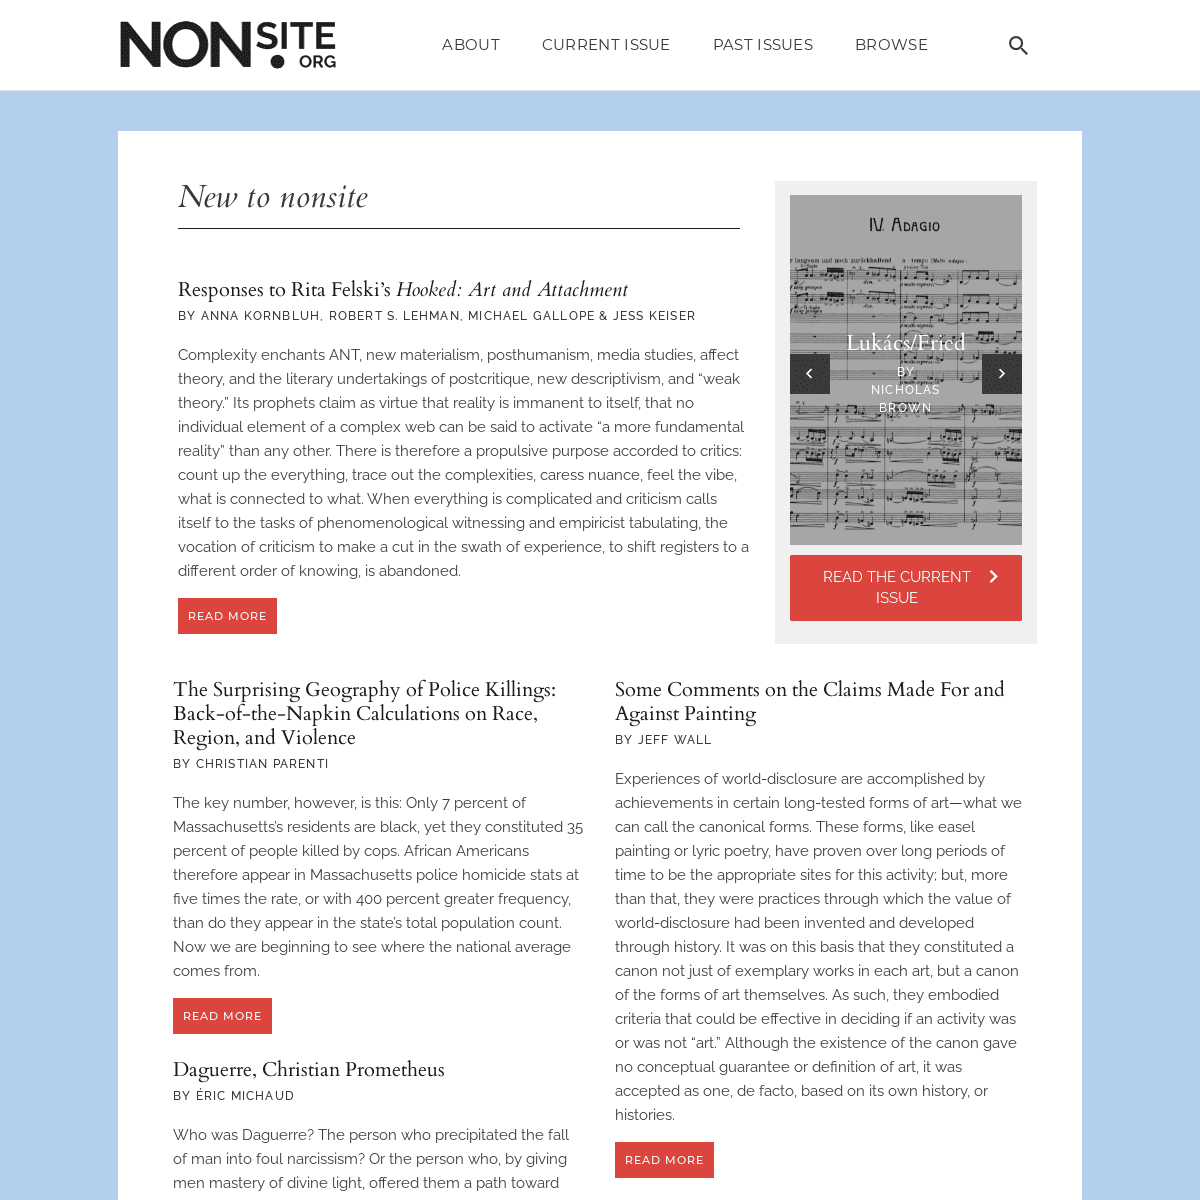 A complete backup of https://nonsite.org